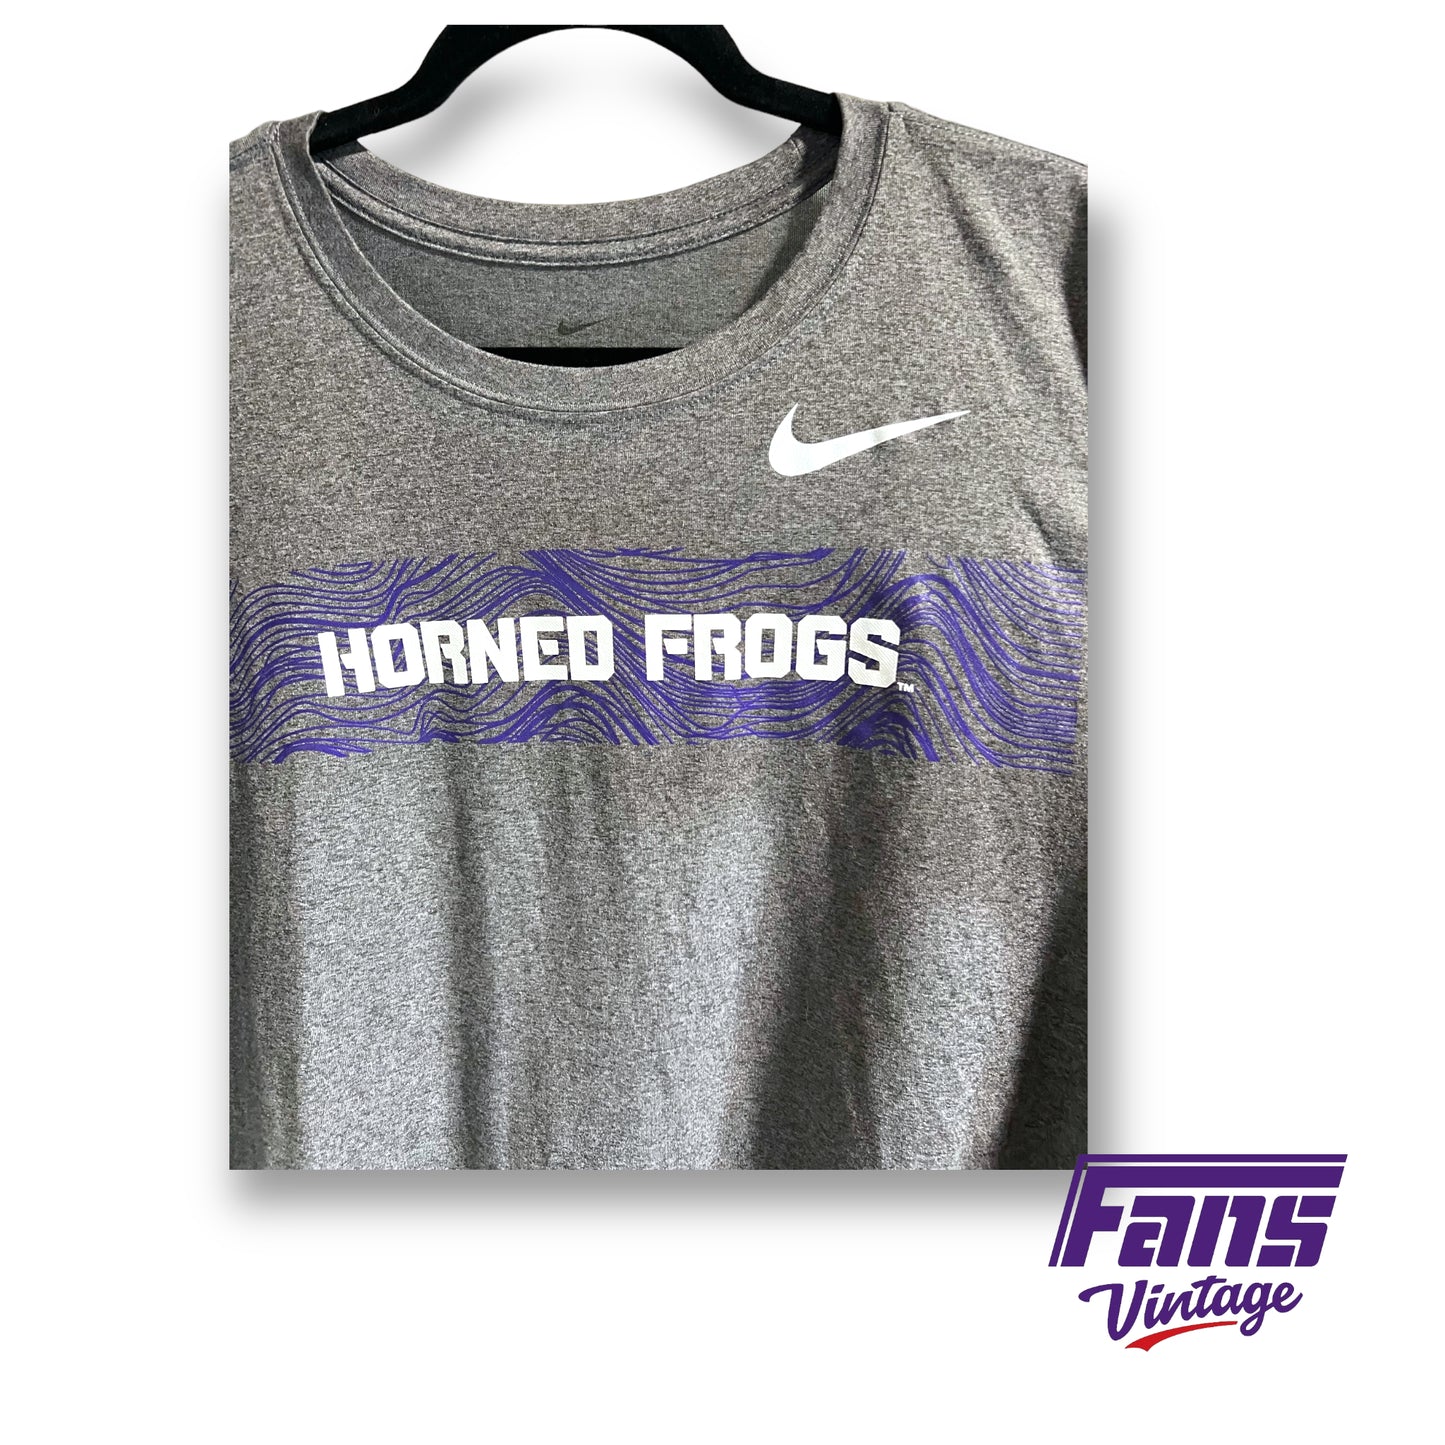 Nike TCU Horned Frogs team issued dri-fit tee - Cool pattern